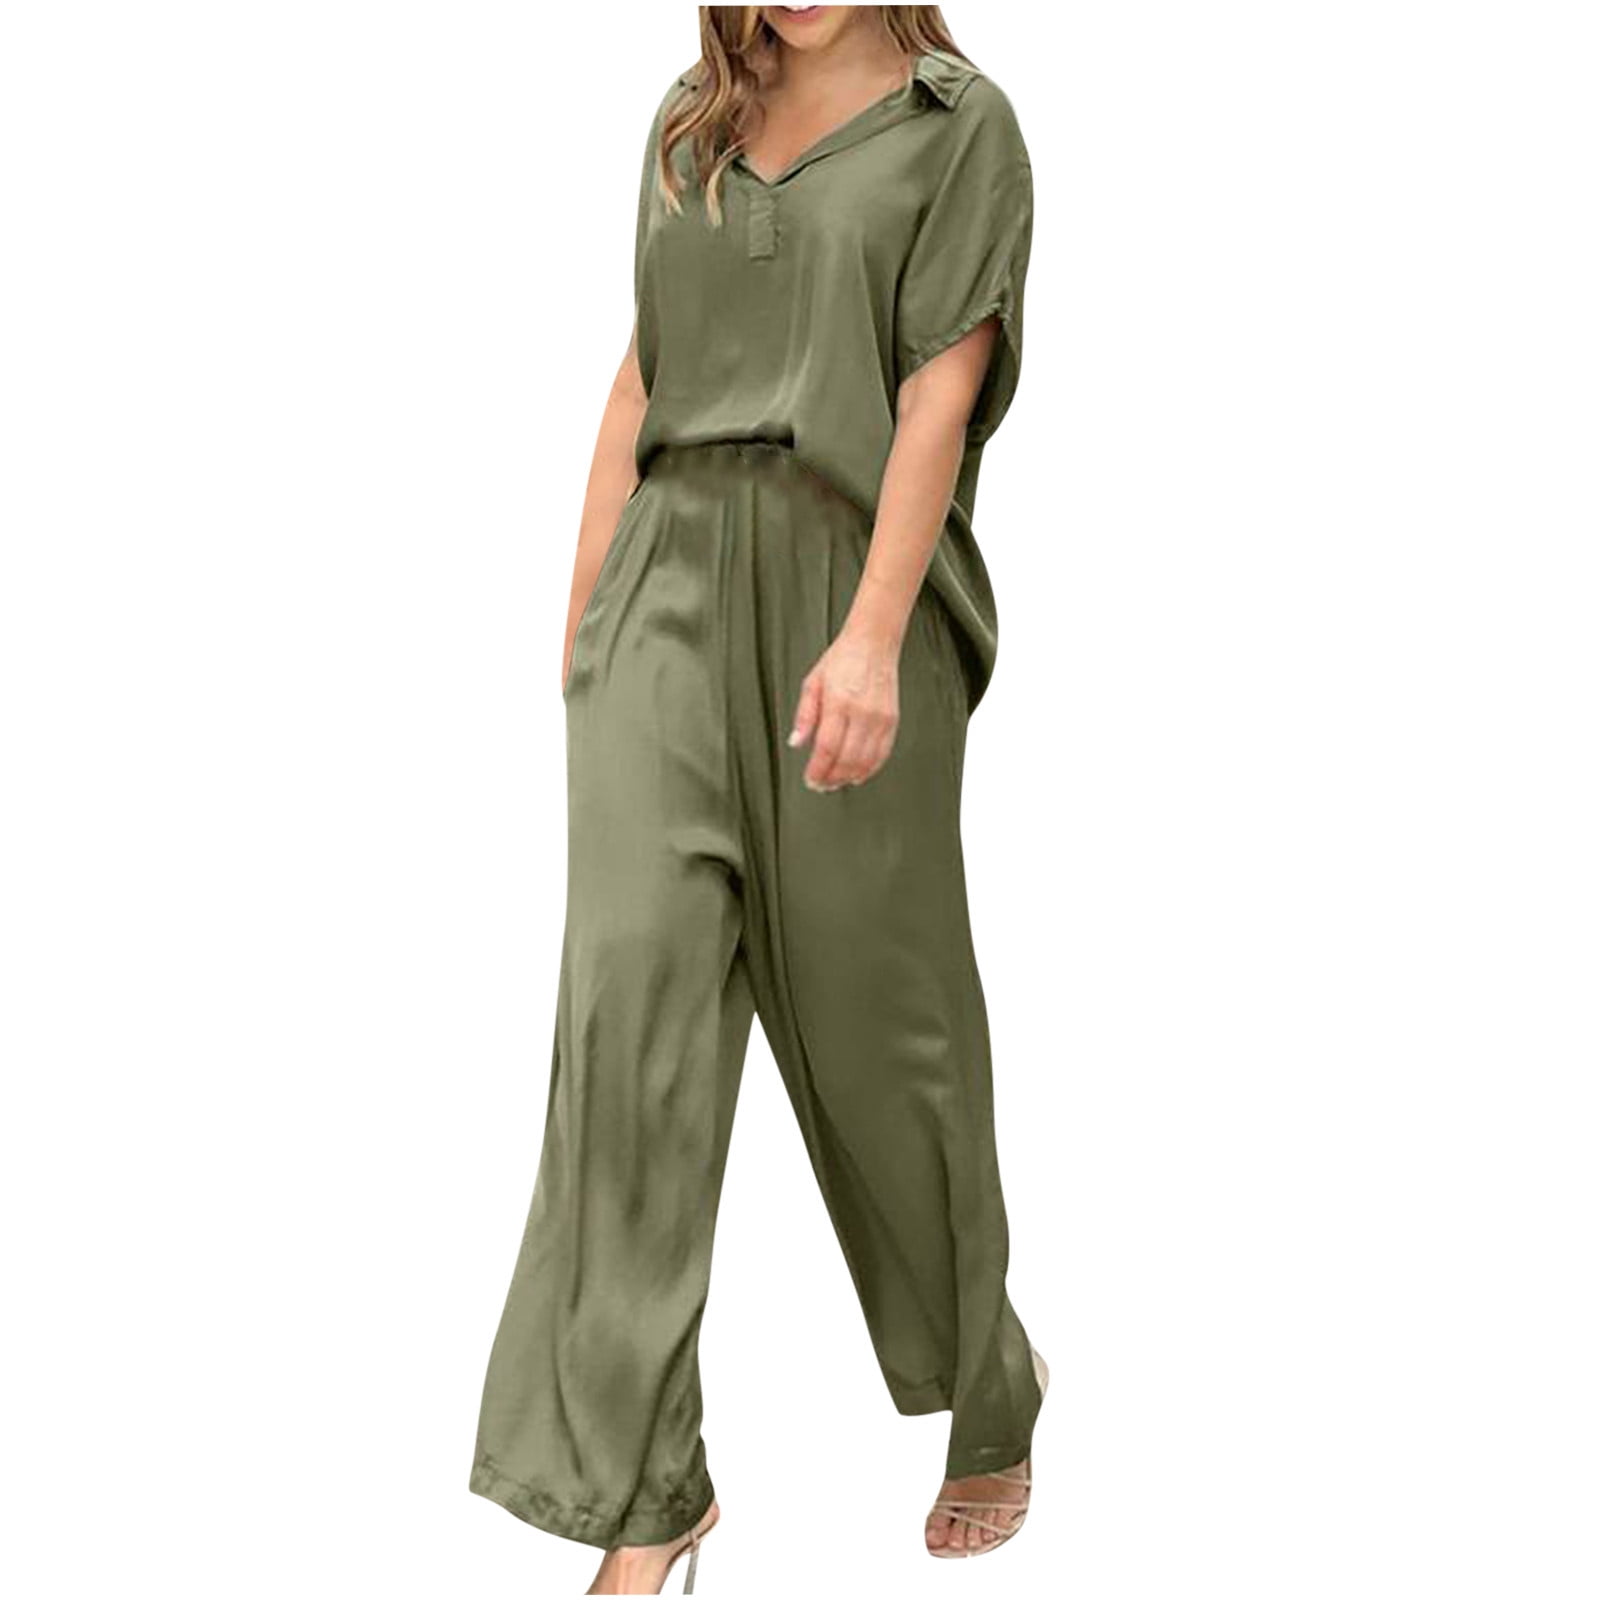 REORIAFEE 2pc Summer Outfits for Women Going out Outfits Women's